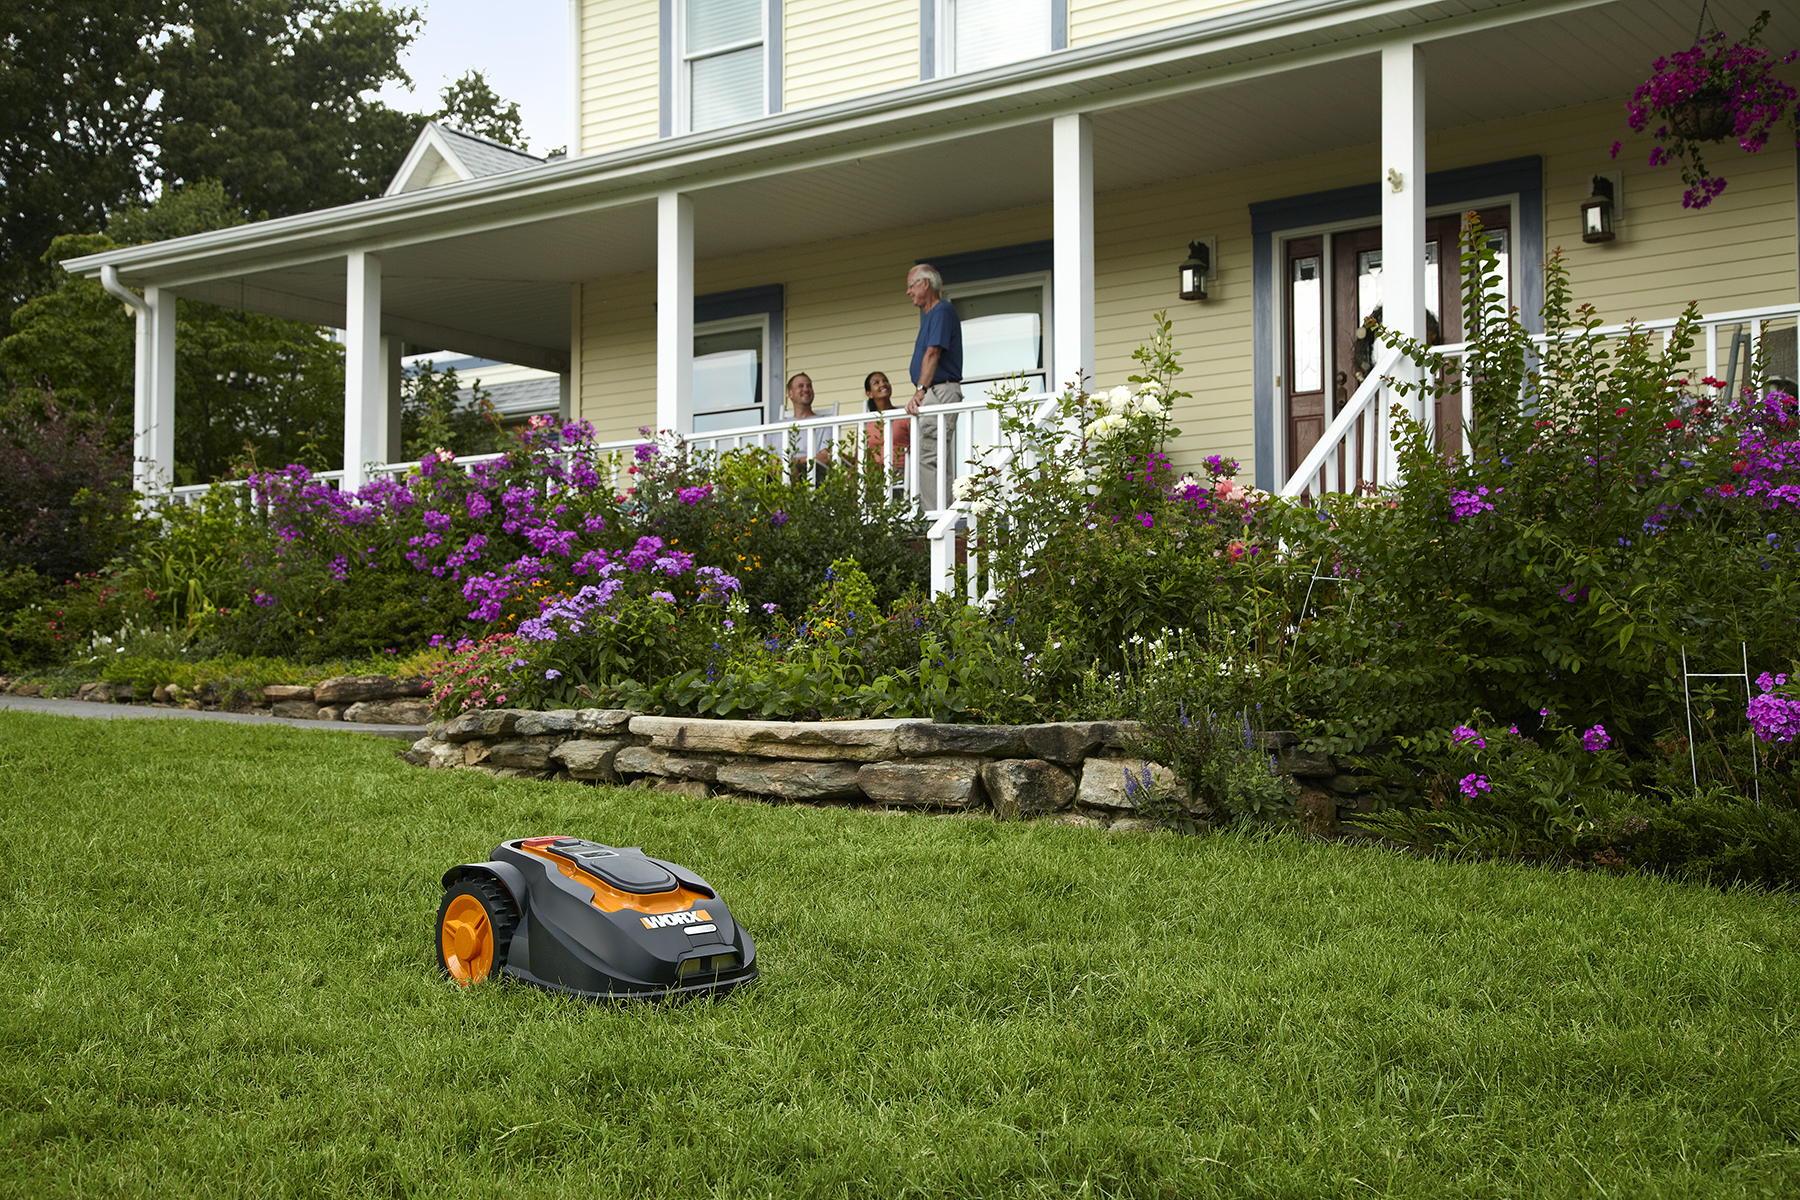 WORX Landroid is an unmanned mowing vehicle